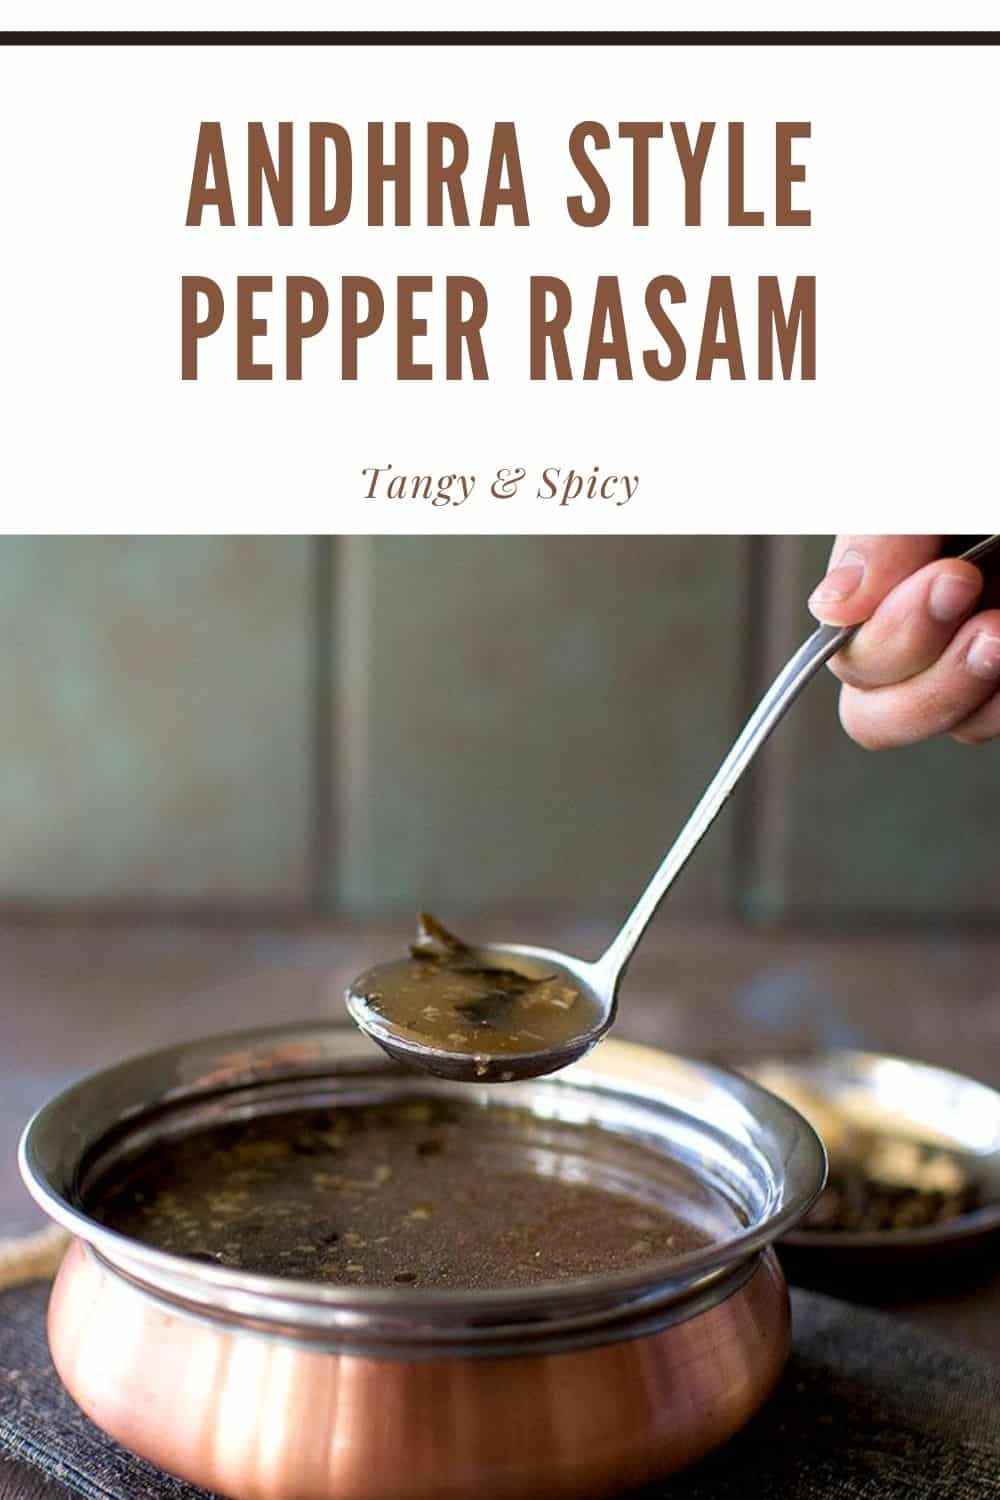 Hand holding a spoon over a bowl of pepper rasam.